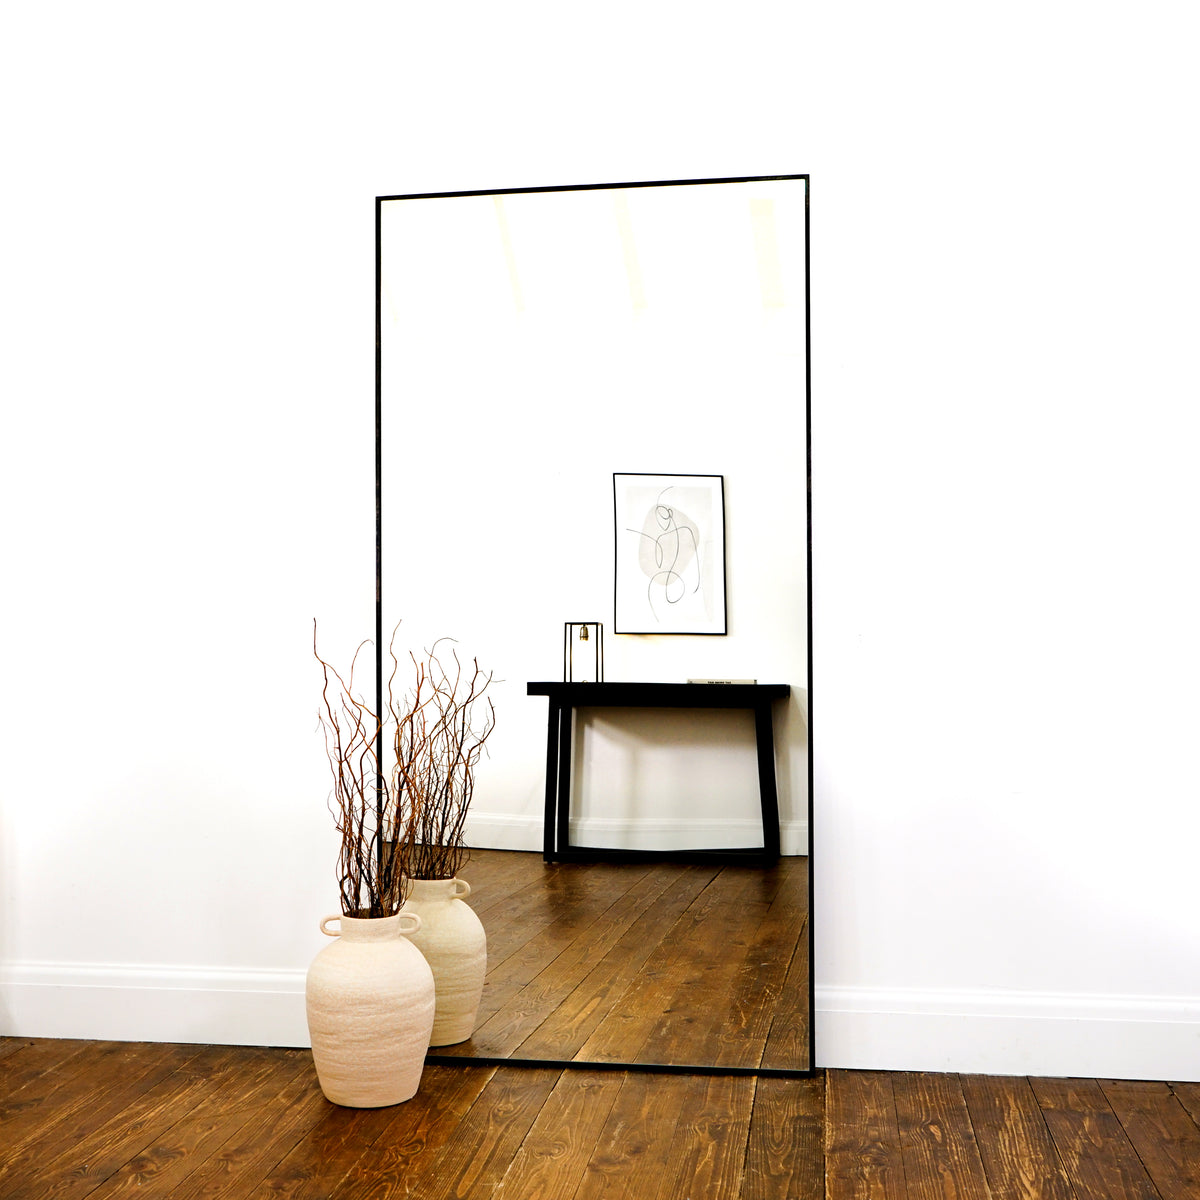 Full Length Extra Large Black Metal Mirror leaning against wall